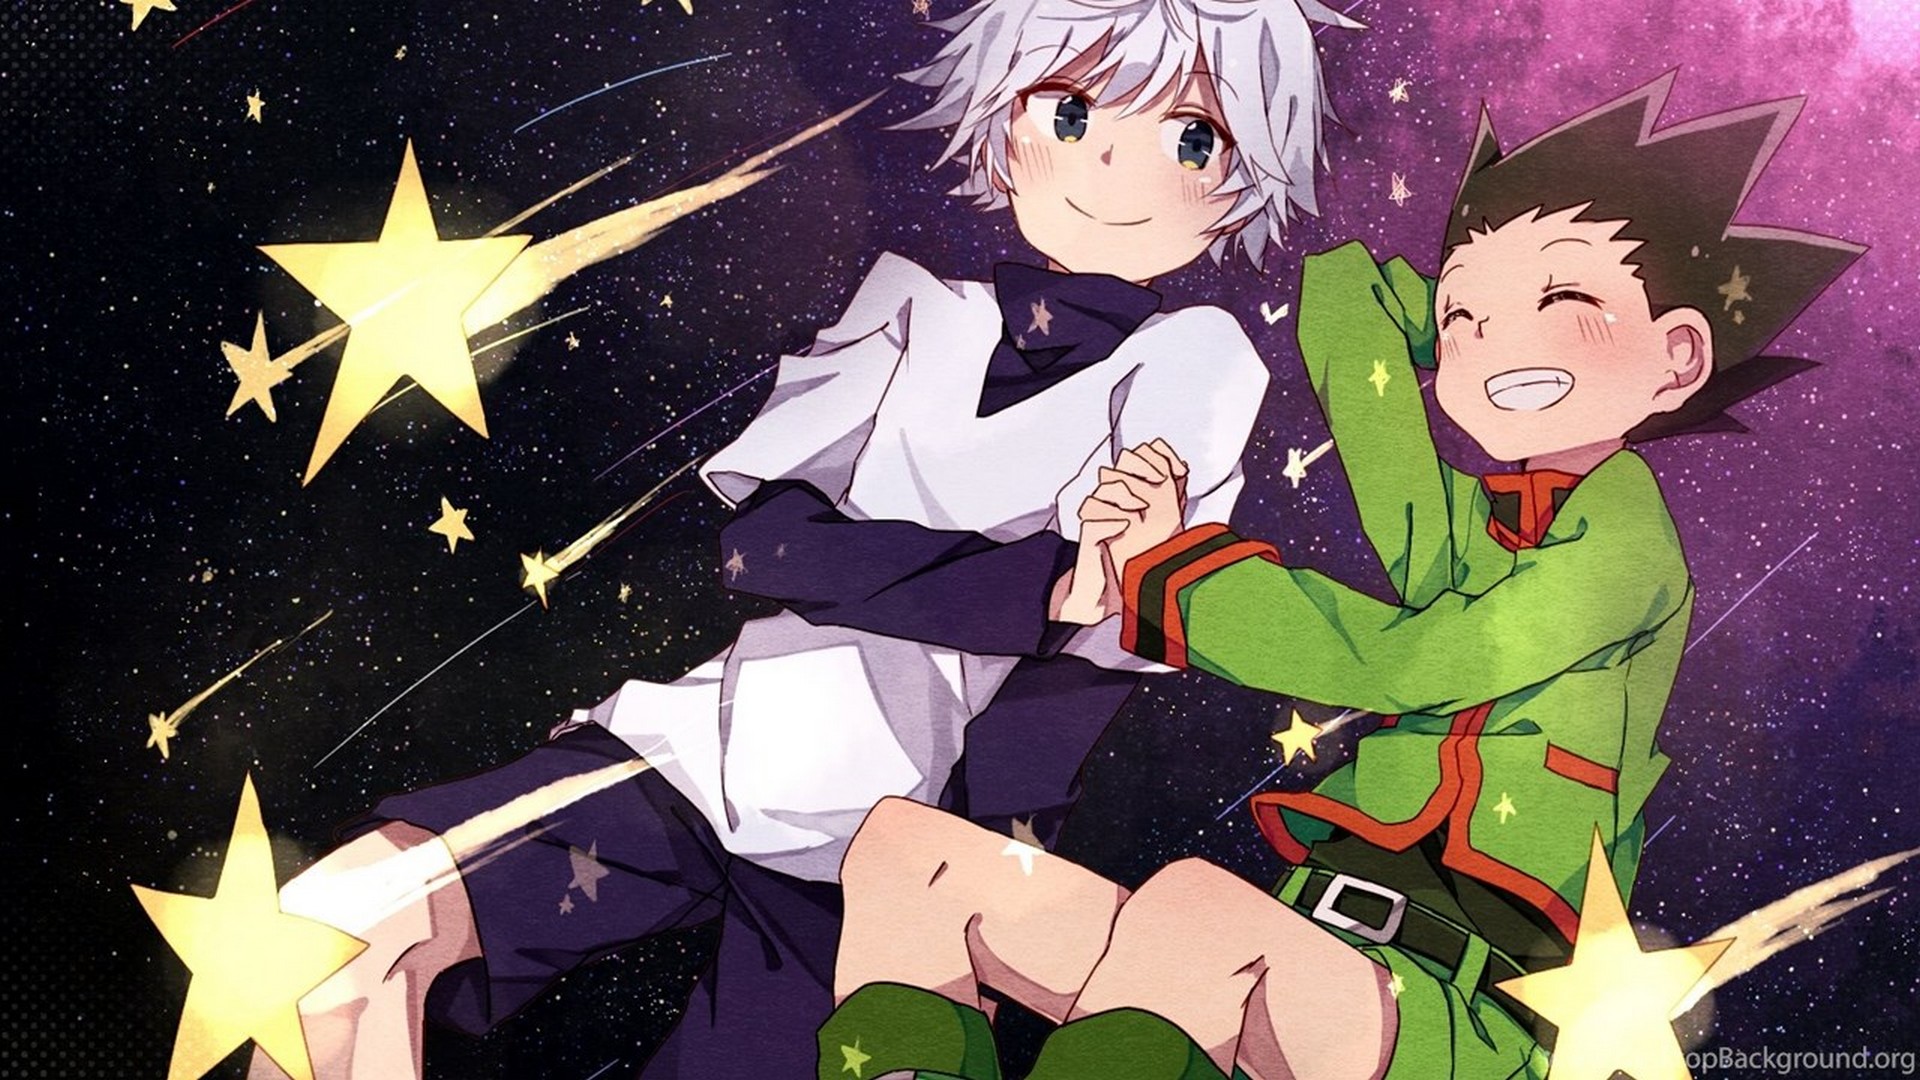 Gon And Killua Desktop Backgrounds With high-resolution 1920X1080 pixel. You can use this wallpaper for your Desktop Computer Backgrounds, Mac Wallpapers, Android Lock screen or iPhone Screensavers and another smartphone device